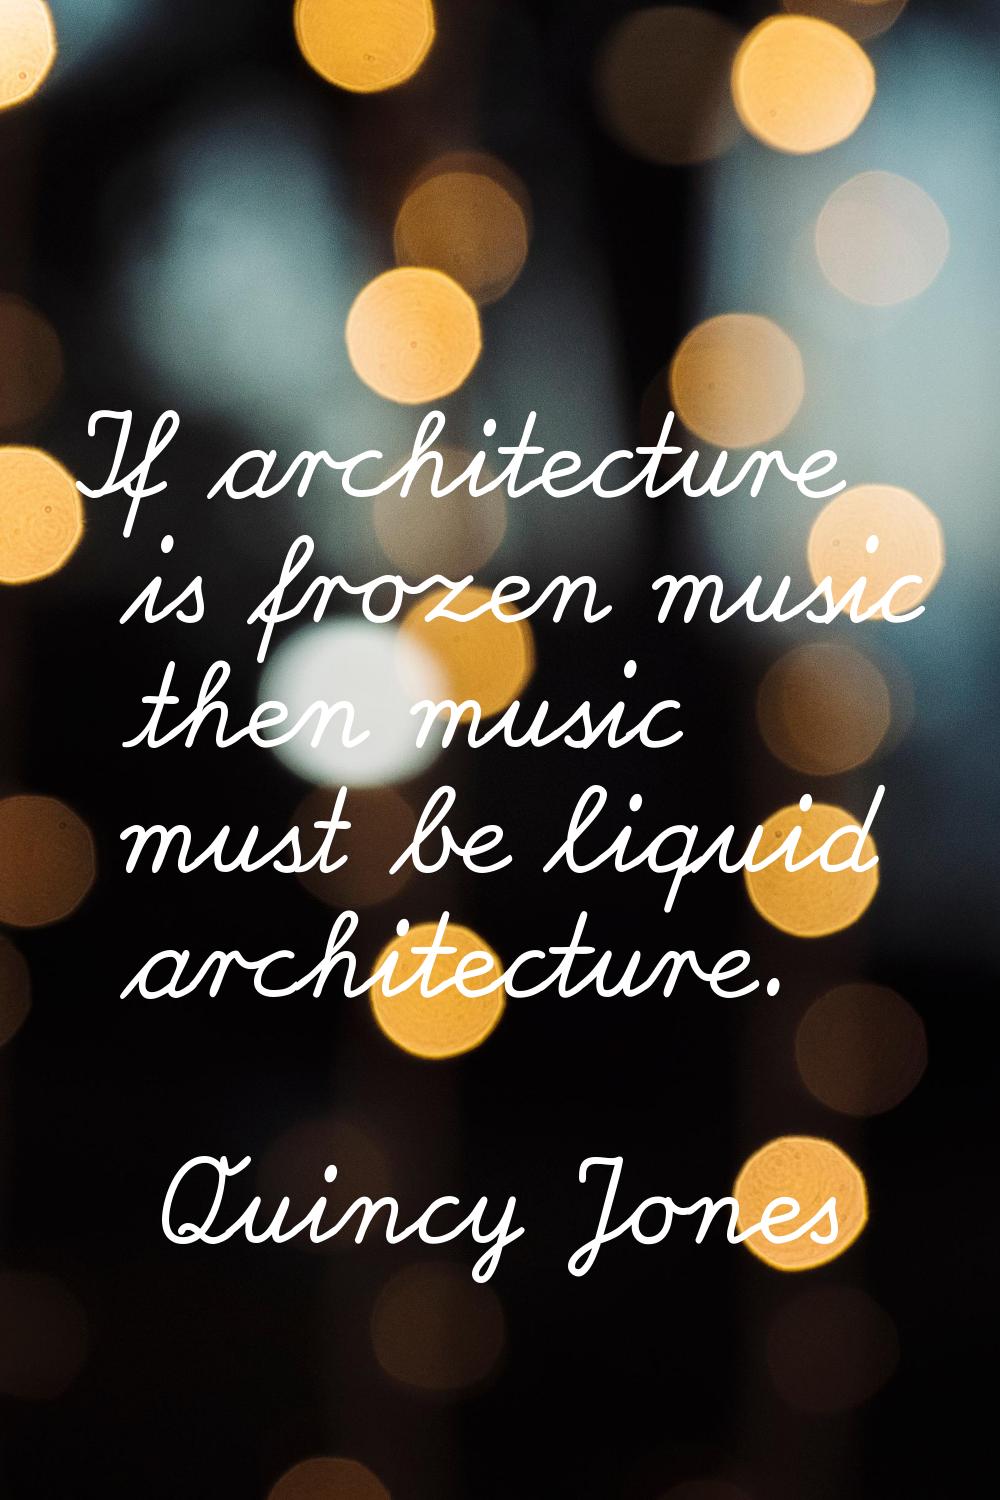 If architecture is frozen music then music must be liquid architecture.